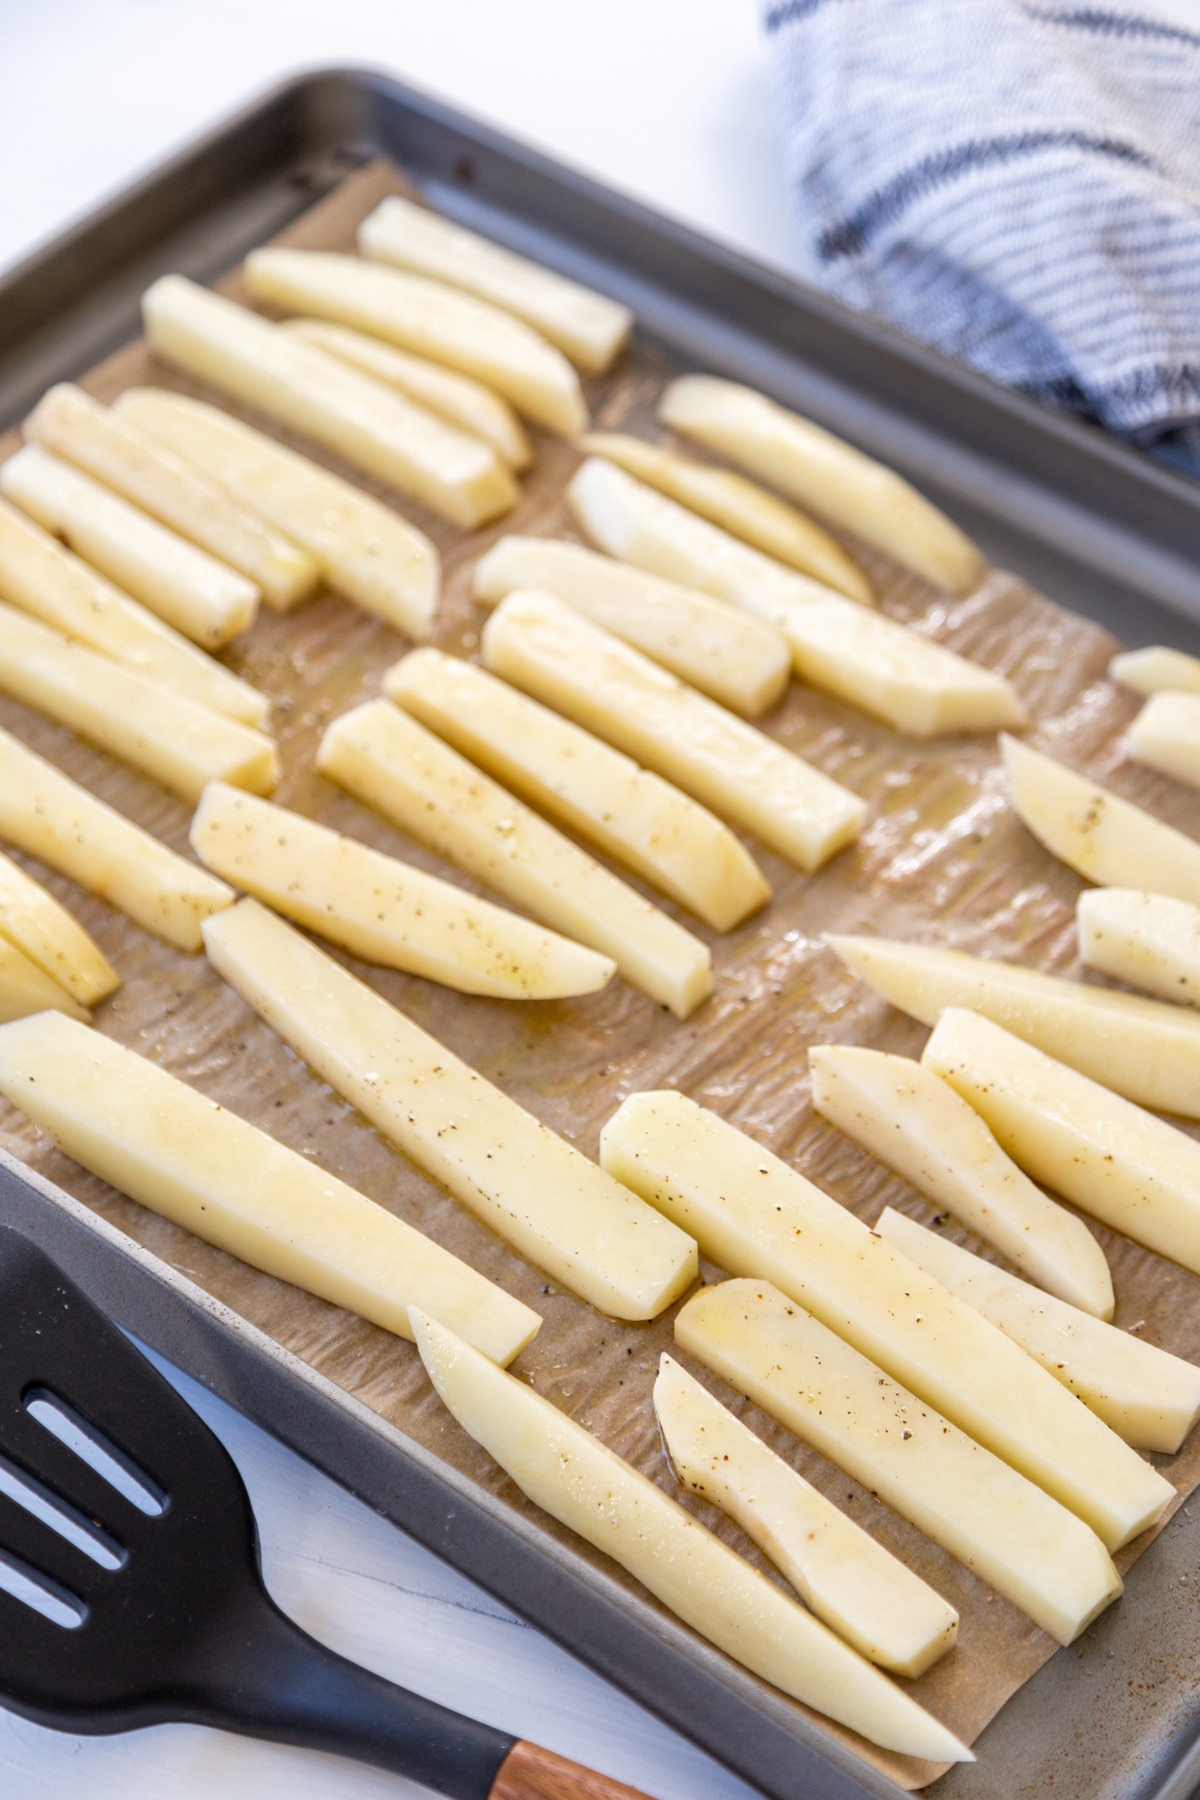 A rimmed baking sheet with unbaked French fries on brown parchment paper and a black spatula and a white and black towel next to the baking sheet.